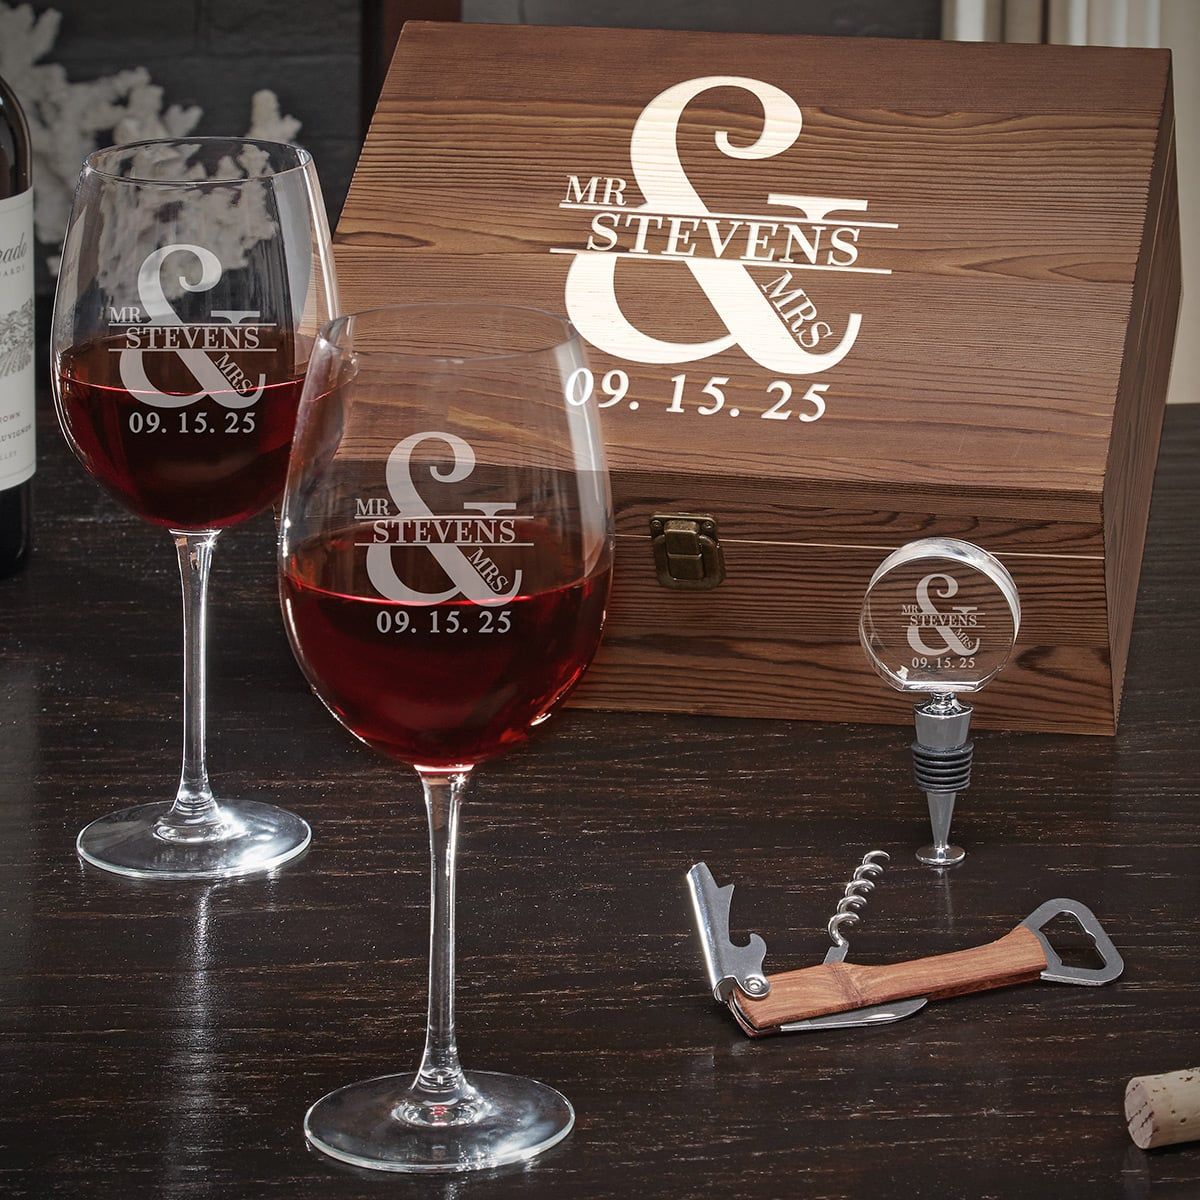 https://images.homewetbar.com/media/catalog/product/7/7/7741-love-and-marriage-wine-lover-box-set-with-crystal-wine-stopper_1.jpg?store=default&image-type=image